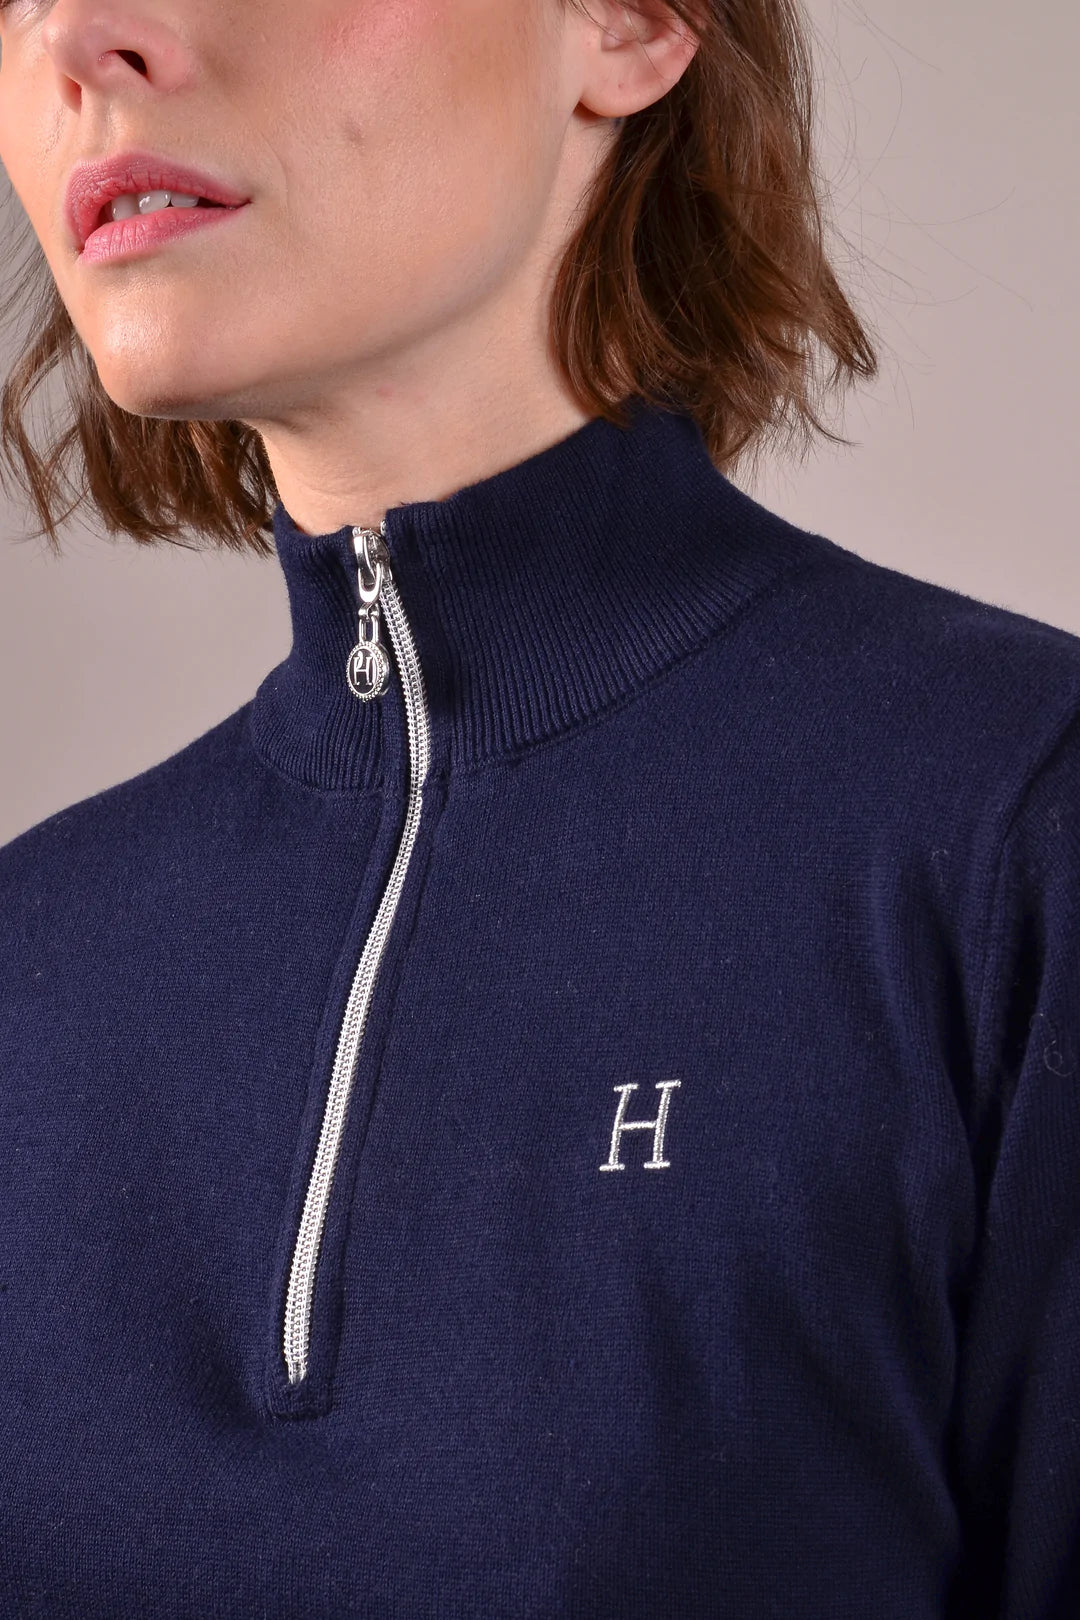 Harcour Swing 1/4 Zip Pullover Sweater